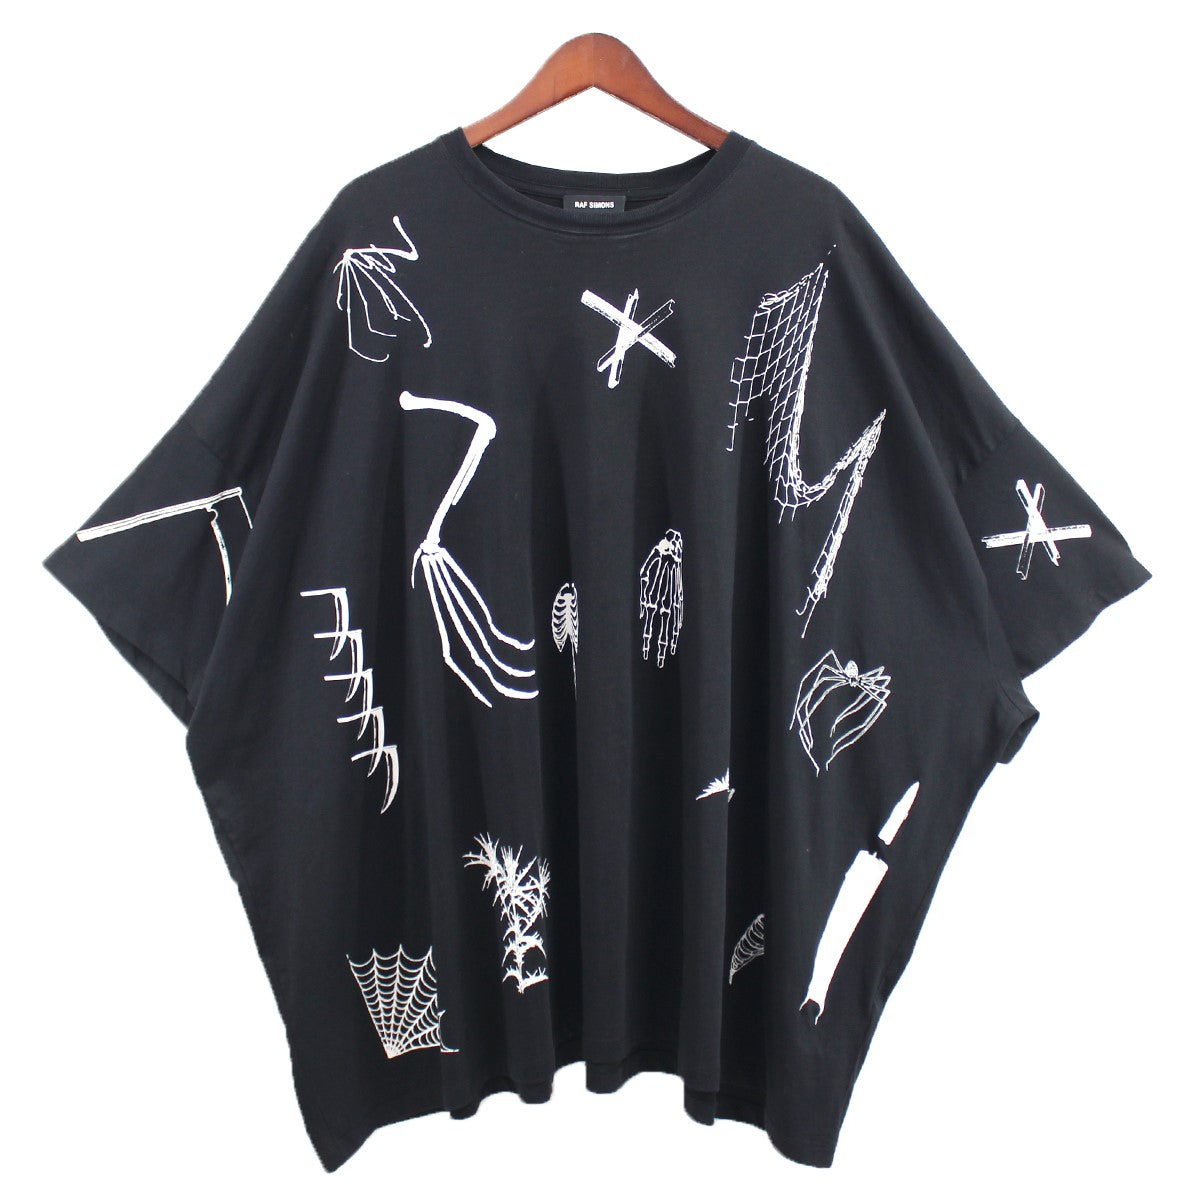 RAF SIMONS(ラフシモンズ) 21AW Extremely Big Gothic T-shirt ...